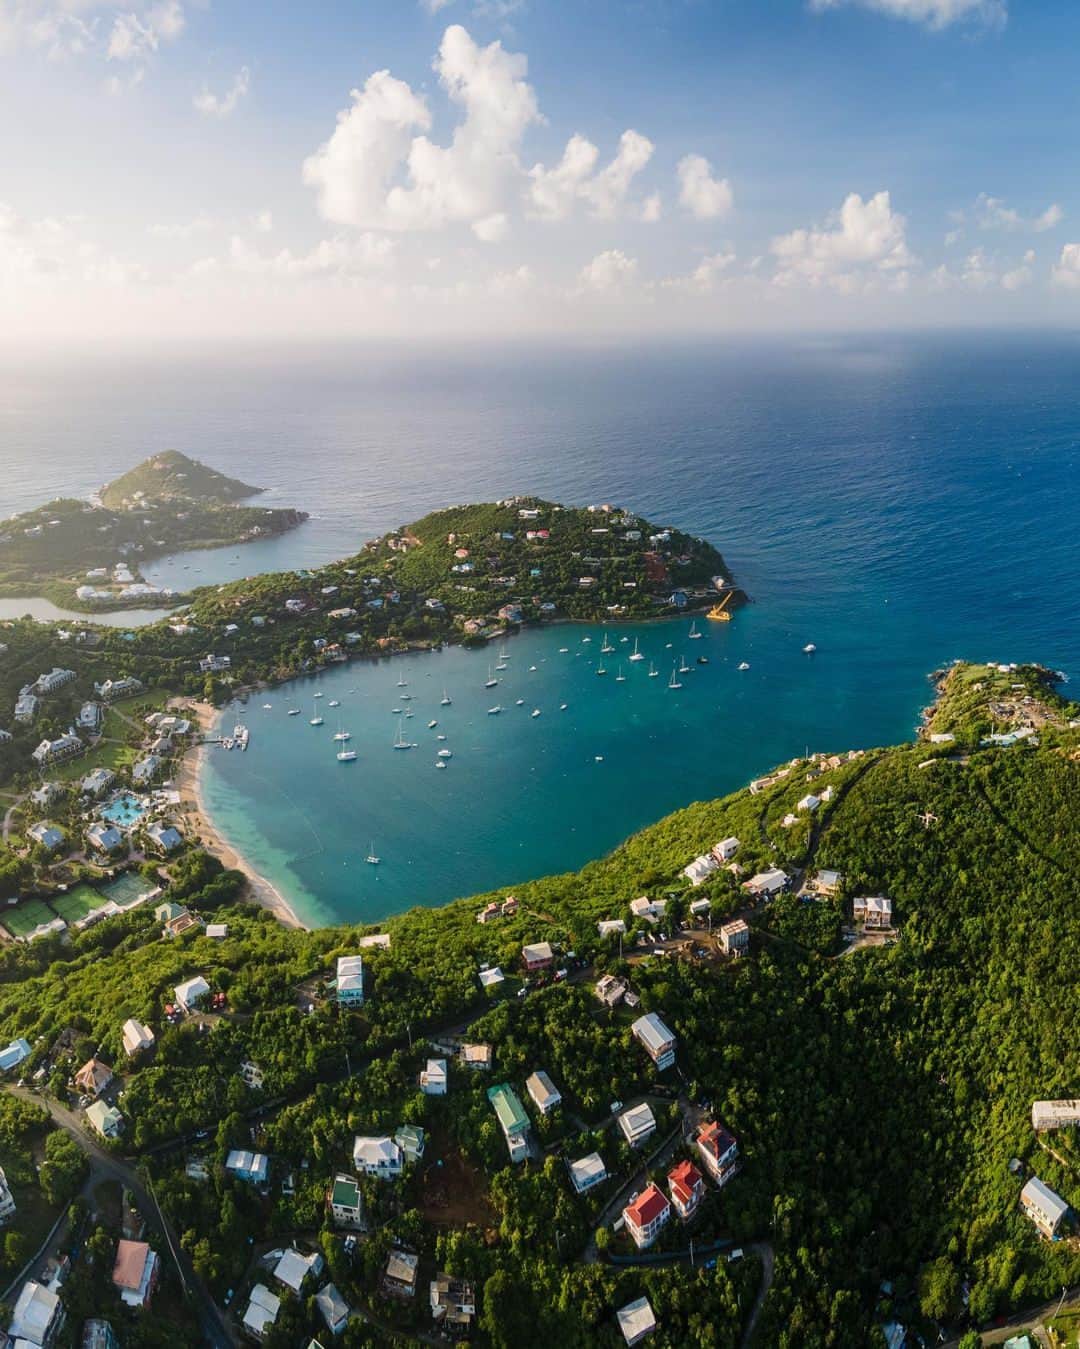 Visit The USAのインスタグラム：「St. John, U.S. Virgin Islands, is easy on the eyes. 🤩  Drive down the scenic North Shore Road or make your way up the more than 20 hiking trails around the island for picture-perfect views. Save these spots to get them on camera: 📸Trunk Bay Overlook 📸Bordeaux Mountain Trail 📸Peace Hill Trail 📸Ram Head Trail 📸Cinnamon Bay Trail  📸: @wally.iv  #VisitTheUSA #USVirginIslands #USVI #USVINice #StJohn #BeachVacation」